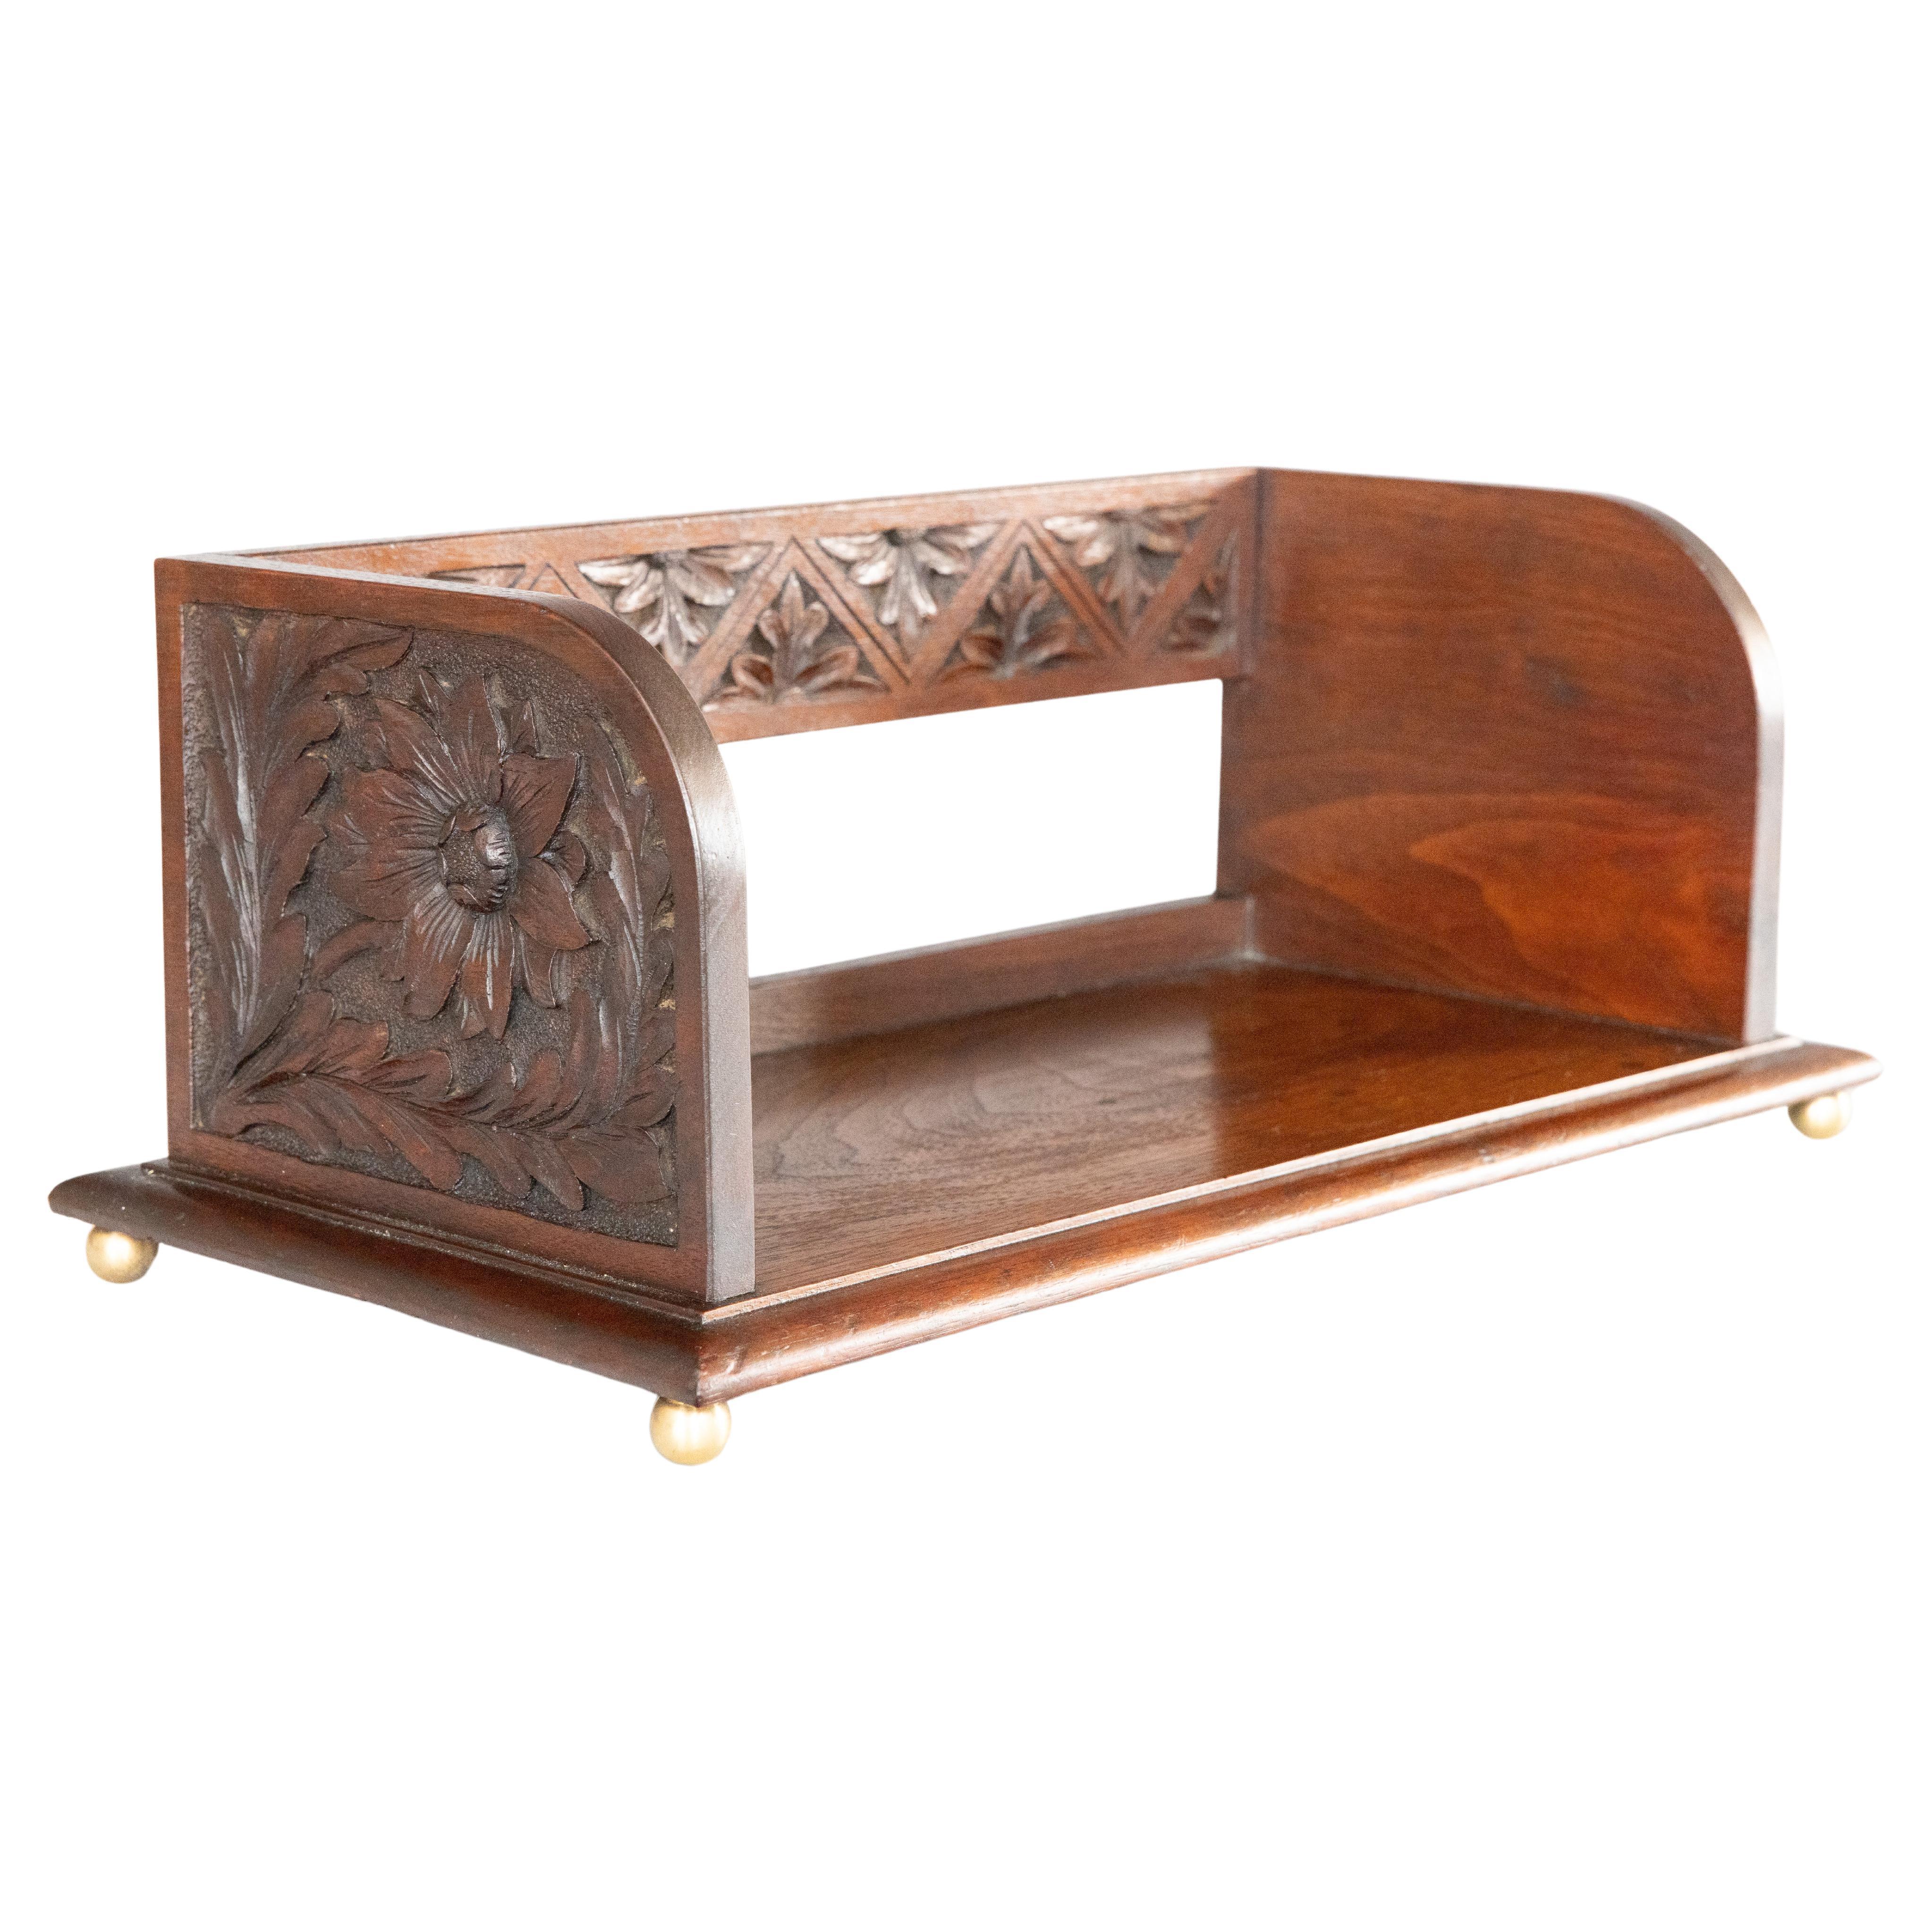 English Carved Mahogany Table Top Book Trough Rack Stand Bookends, C. 1900